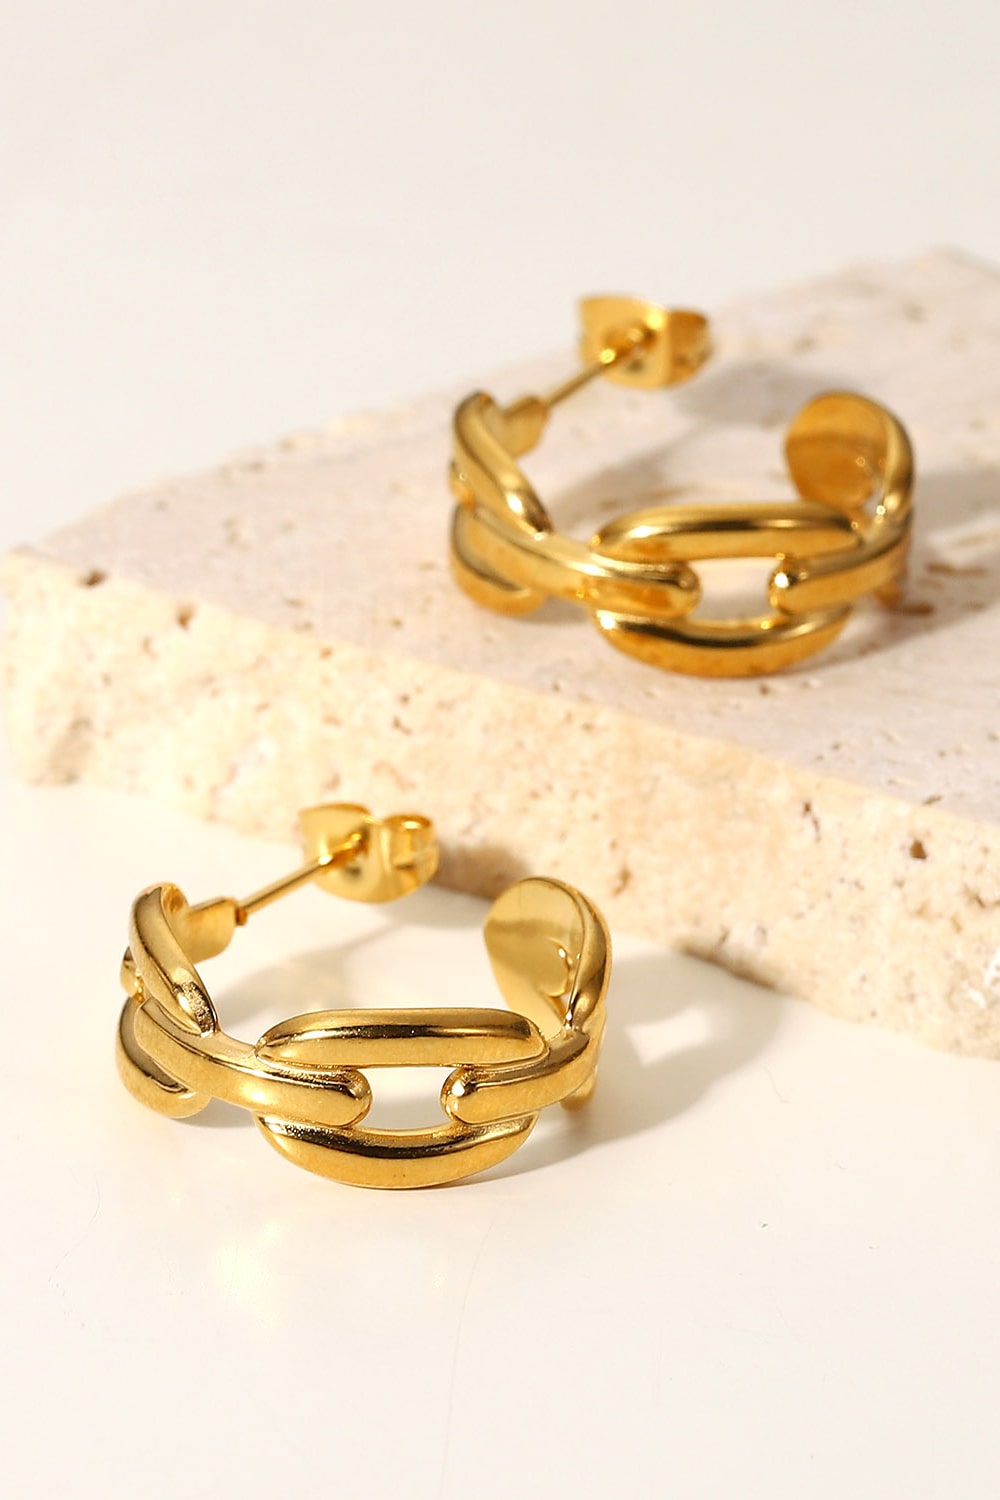 Linked Together Chain C-Hoop Earrings - White Stag Clothing